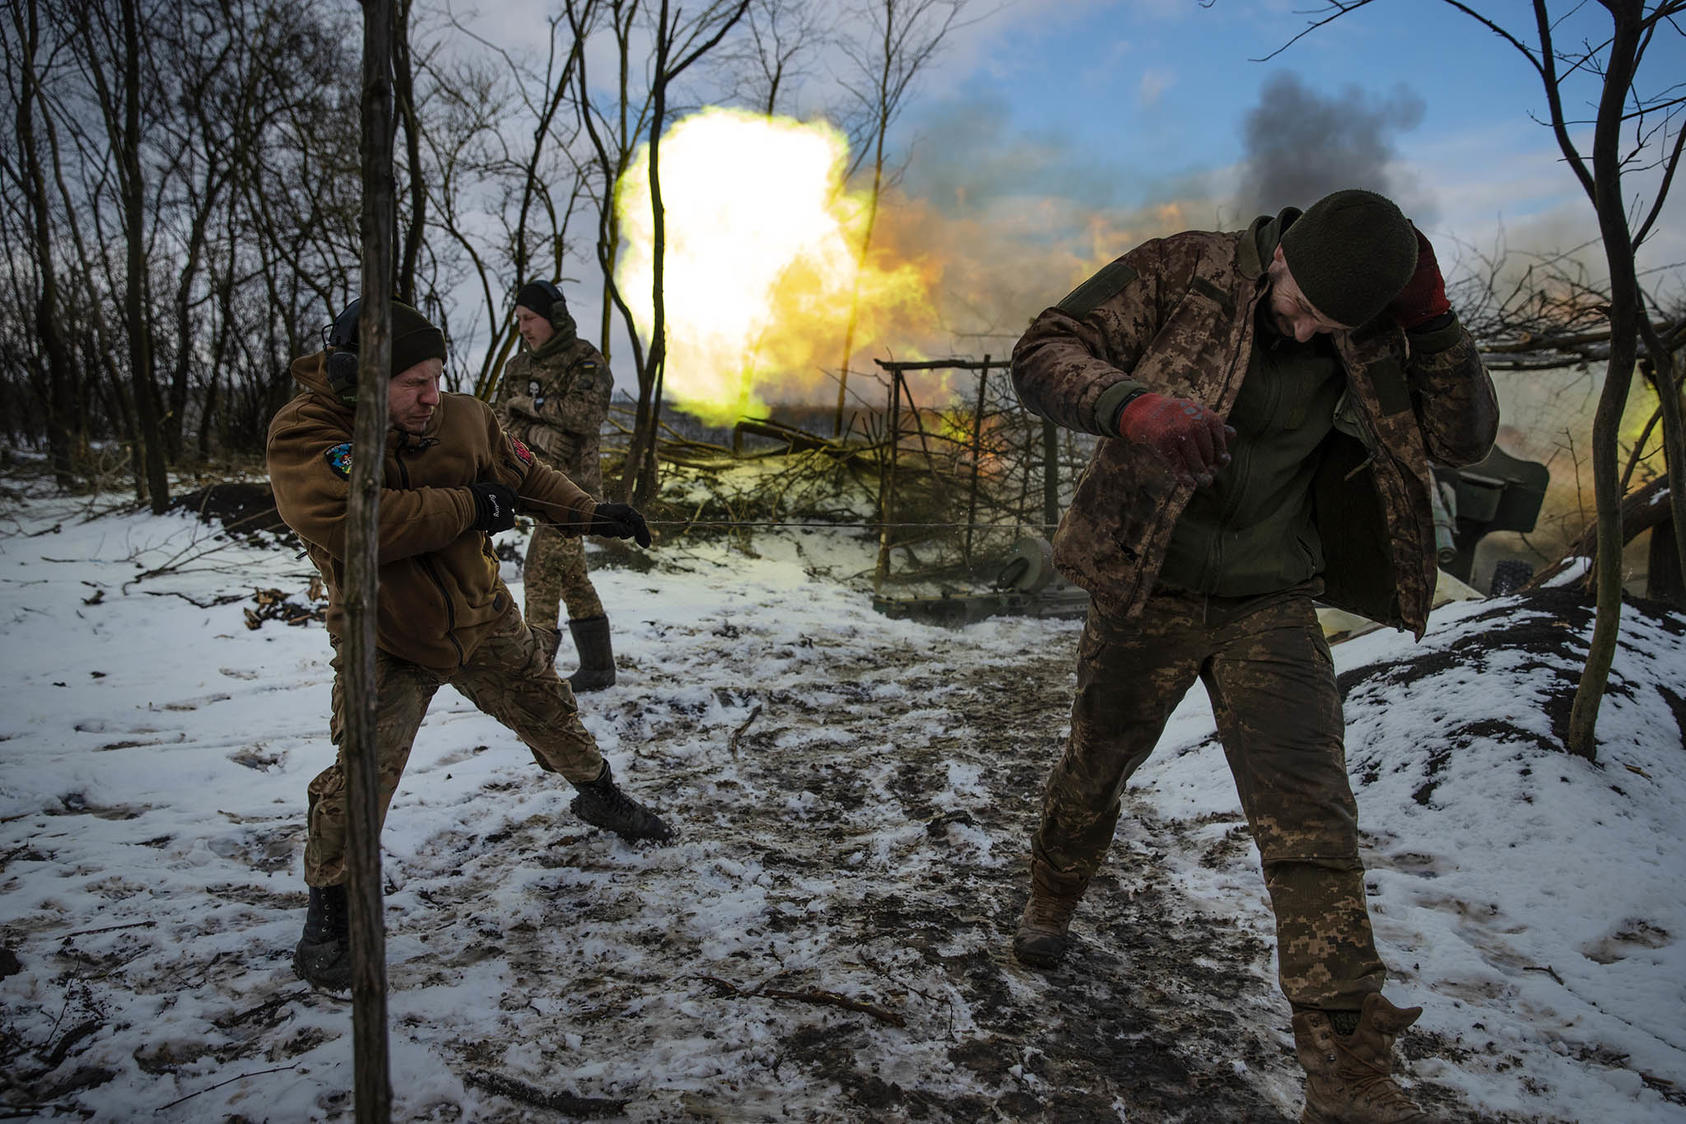 Ukrainian soldiers fire a howitzer at Russian positions in Ukraine’s Donbas region on February 14. Ukraine is hustling to preempt a new Russian offensive and recover territory to force Russia into negotiating a withdrawal. (Tyler Hicks/The New York Times)